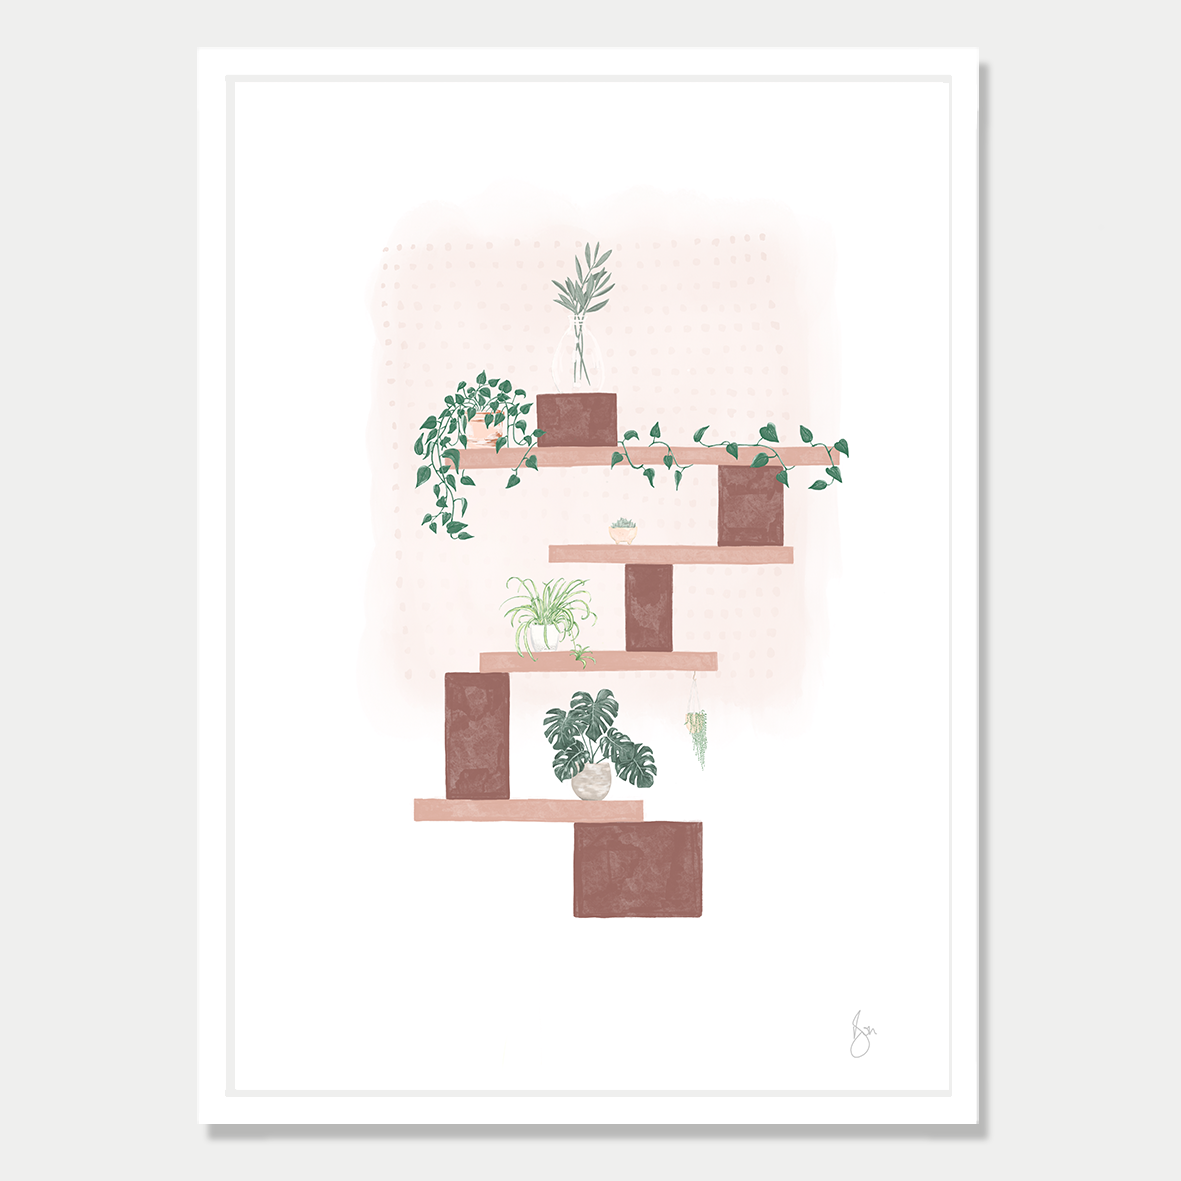 Art print of several blocks balancing with different plants at each level, in a soft autumn colour palette by Bon Jung. Printed in New Zealand by endemicworld and framed in white.